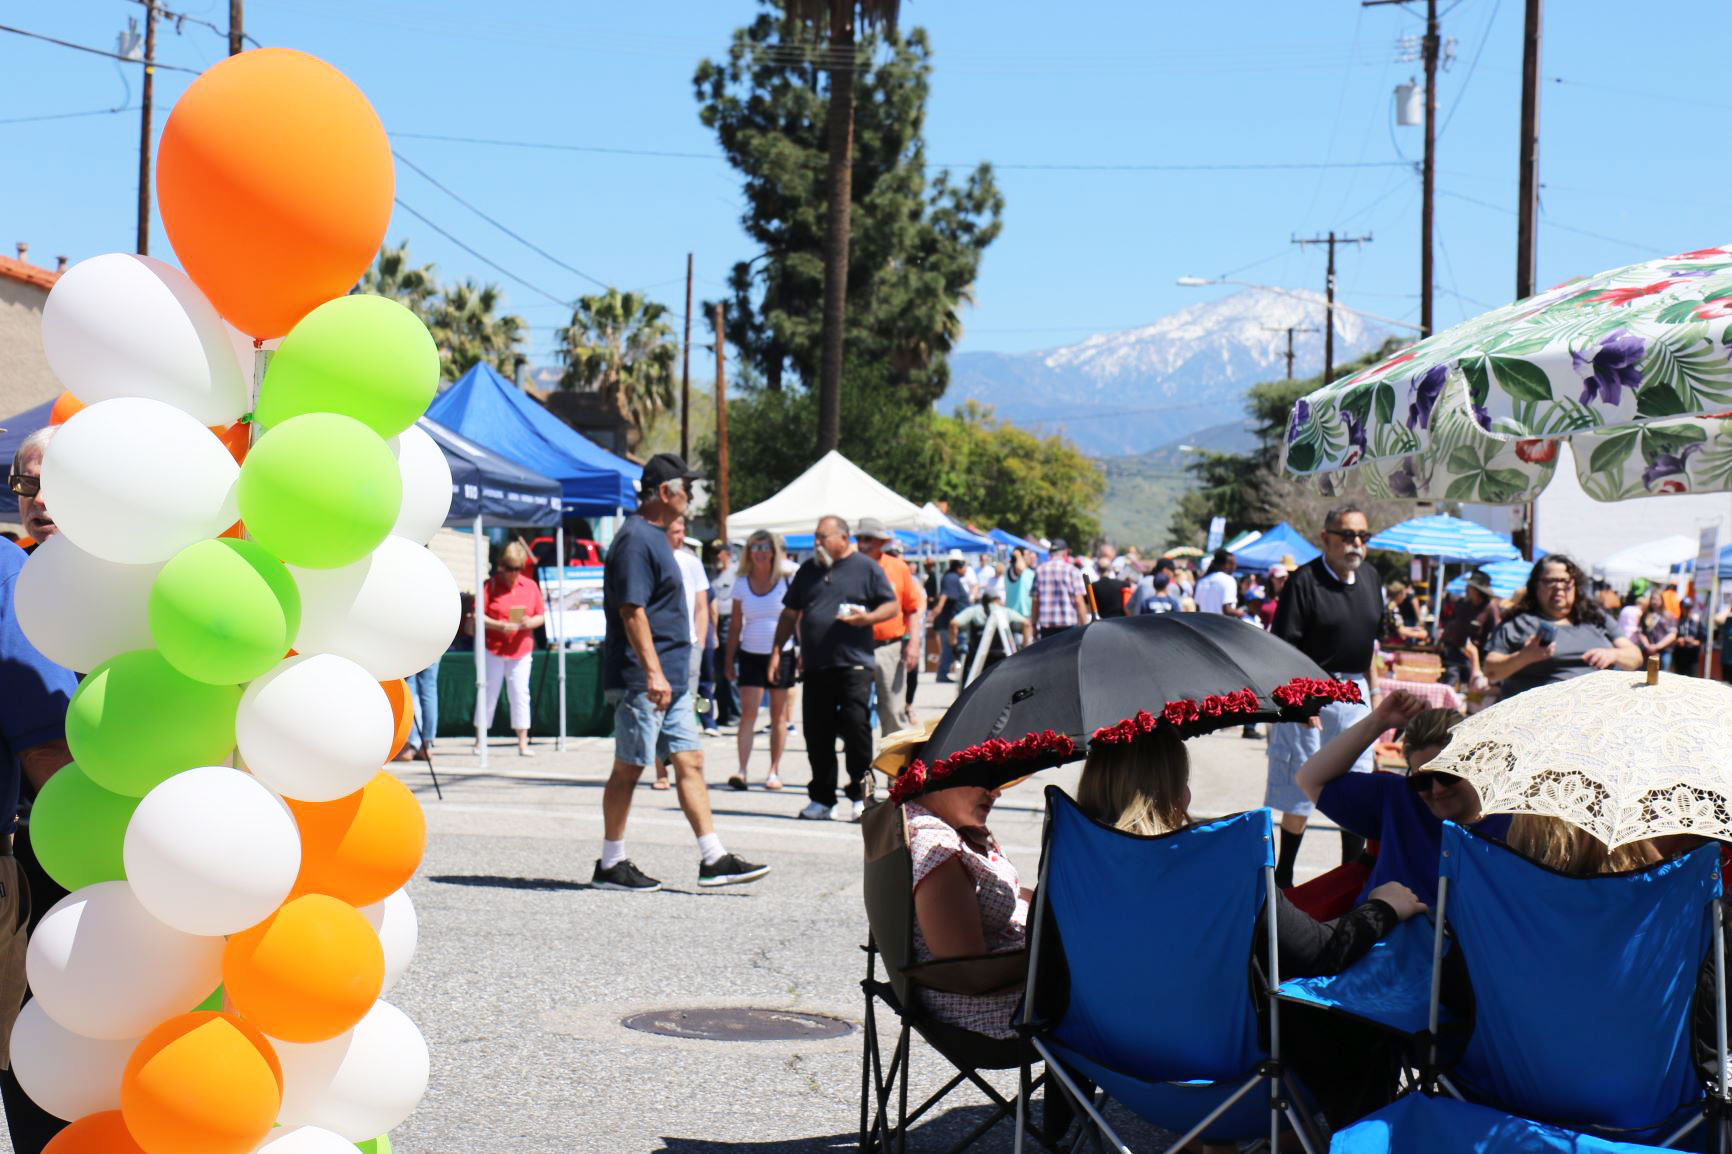 City of Highland kicks off spring with annual Citrus Harvest Festival